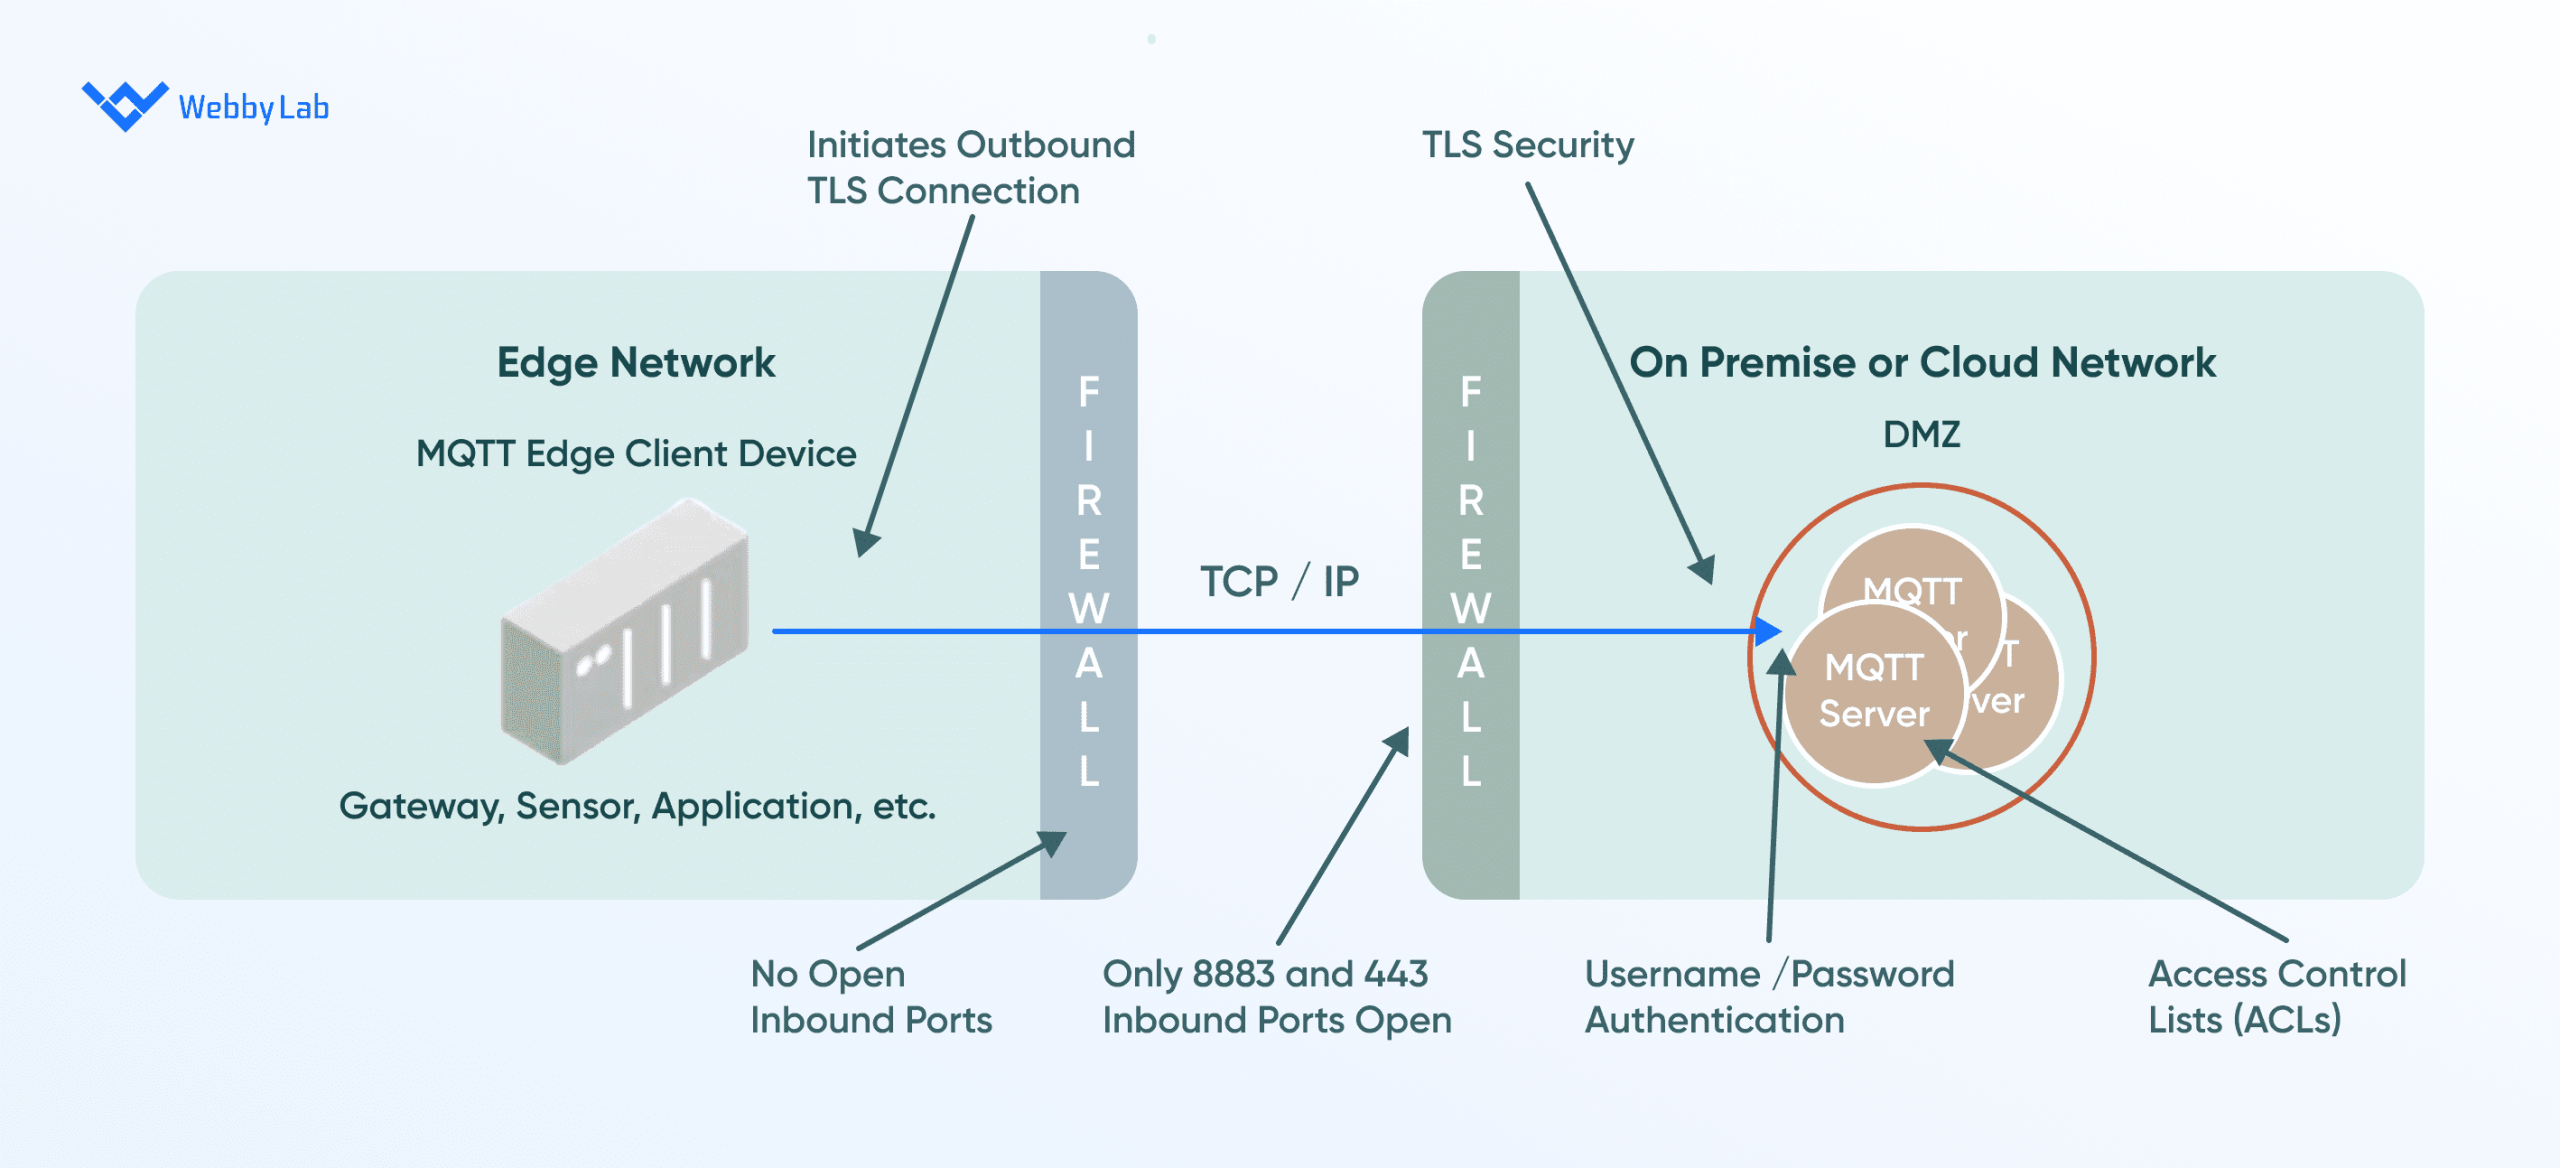  The MQTT using TSL and a firewall for security.